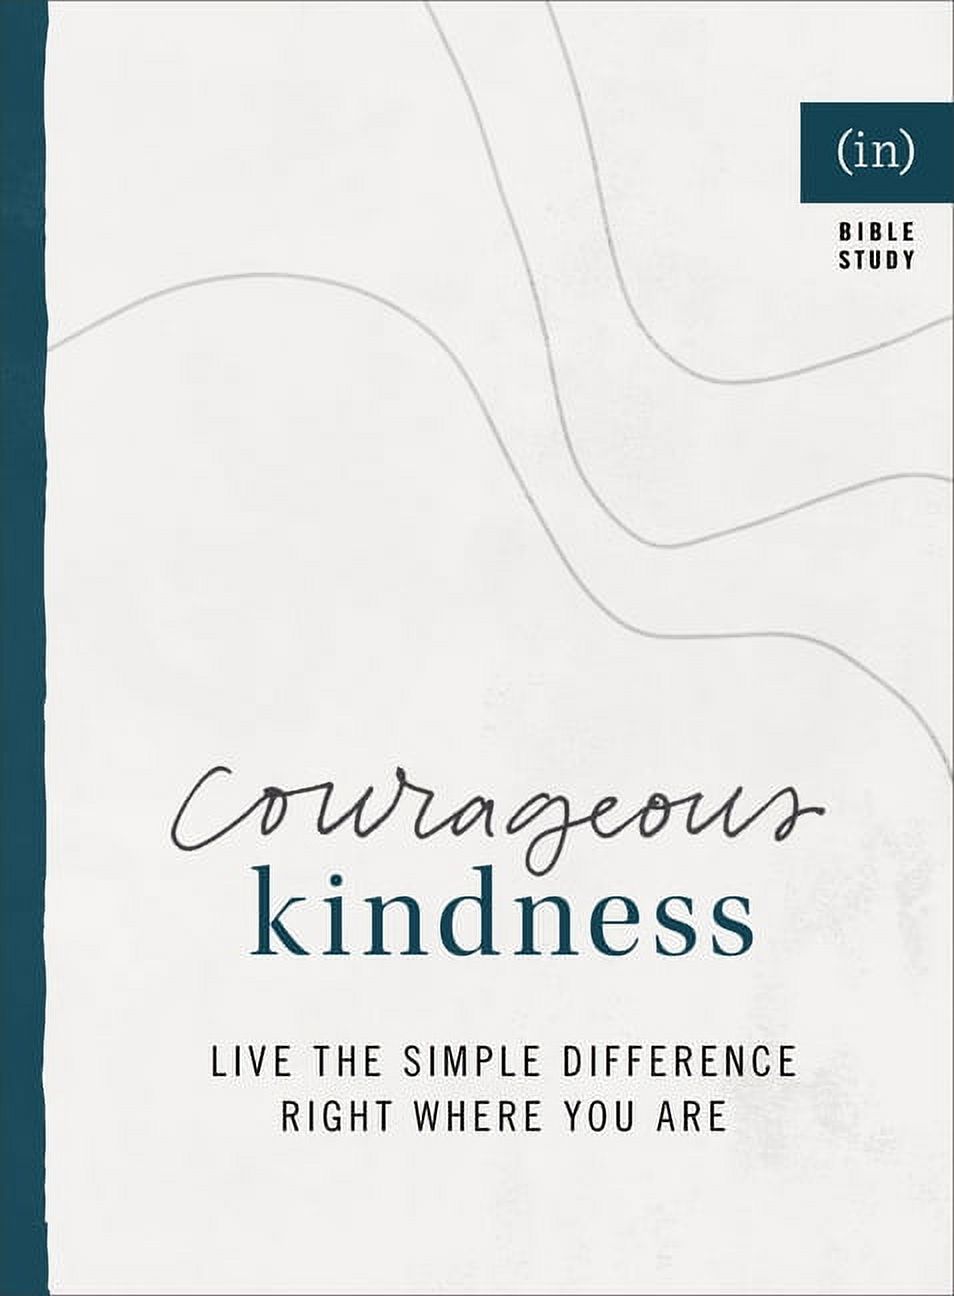 Courageous Kindness: Live the Simple Difference Right Where You Are (Paperback) - image 1 of 1